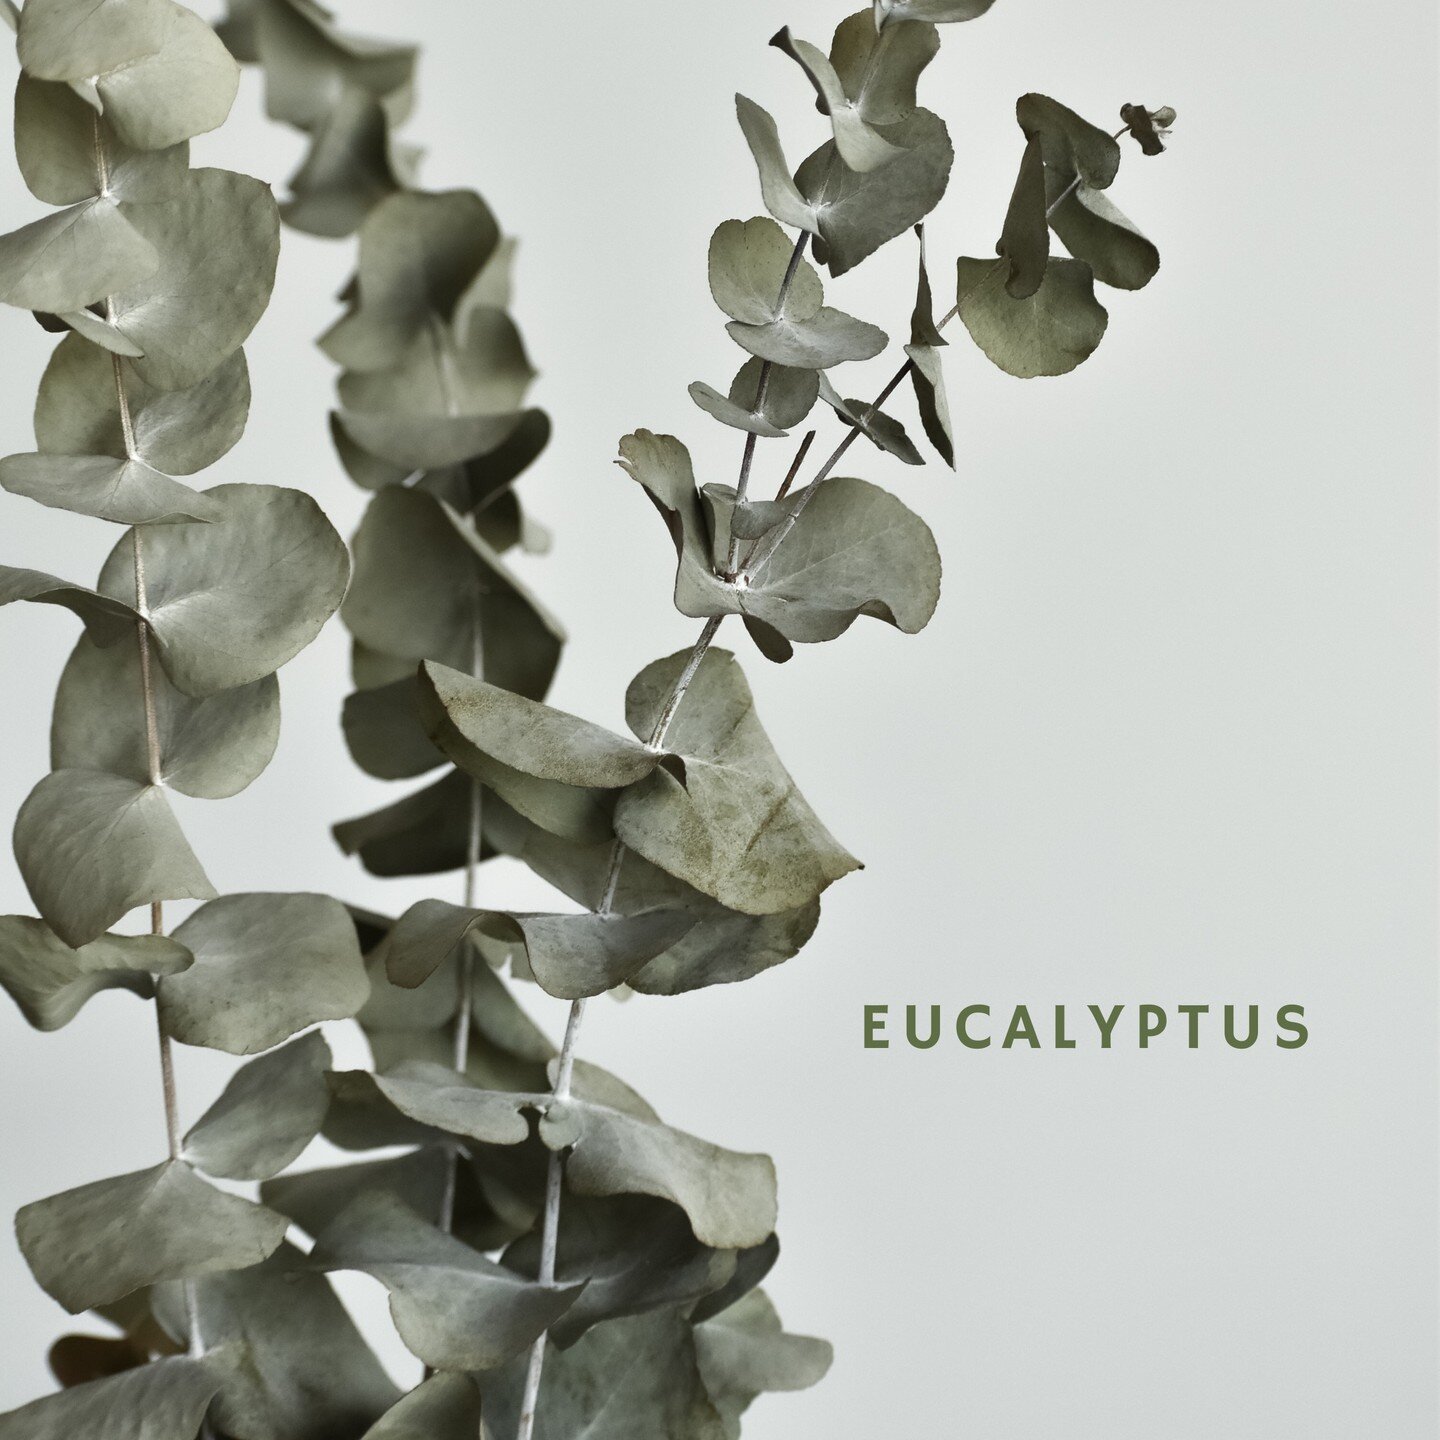 Eucalyptus is often touted for its calming and anti-nausea effects. However, it&rsquo;s also powerful for the skin, as it can increase the skin&rsquo;s water holding capacity. If you suffer from dry skin, you likely have low ceramide levels. Ceramide